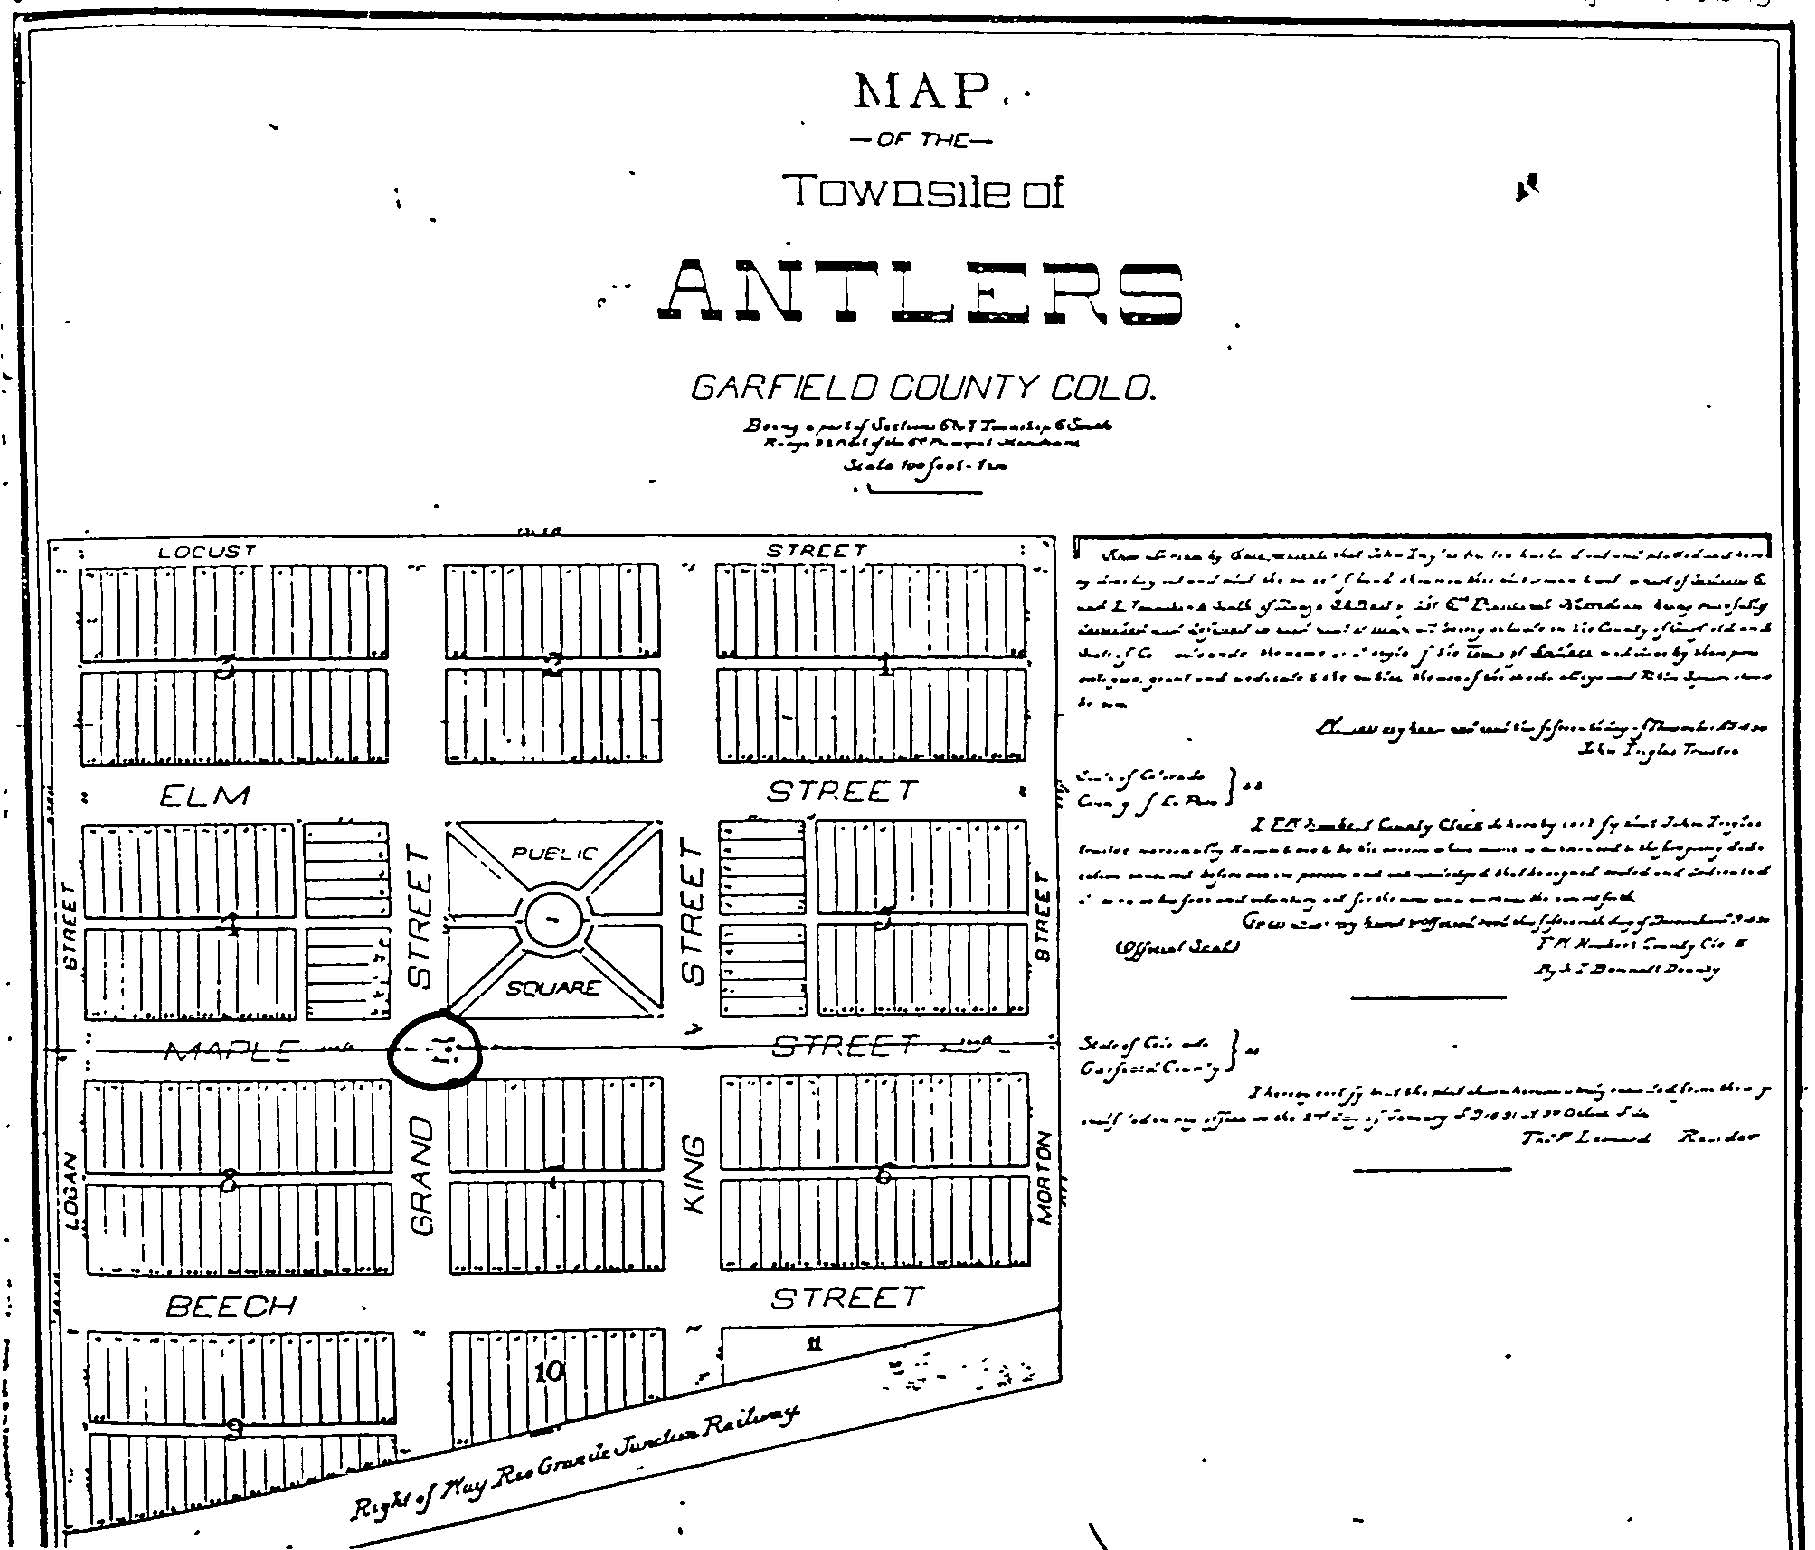 Plat for the townsite of Antlers. Source: Garfield Co. Colorado Geographic Information System.